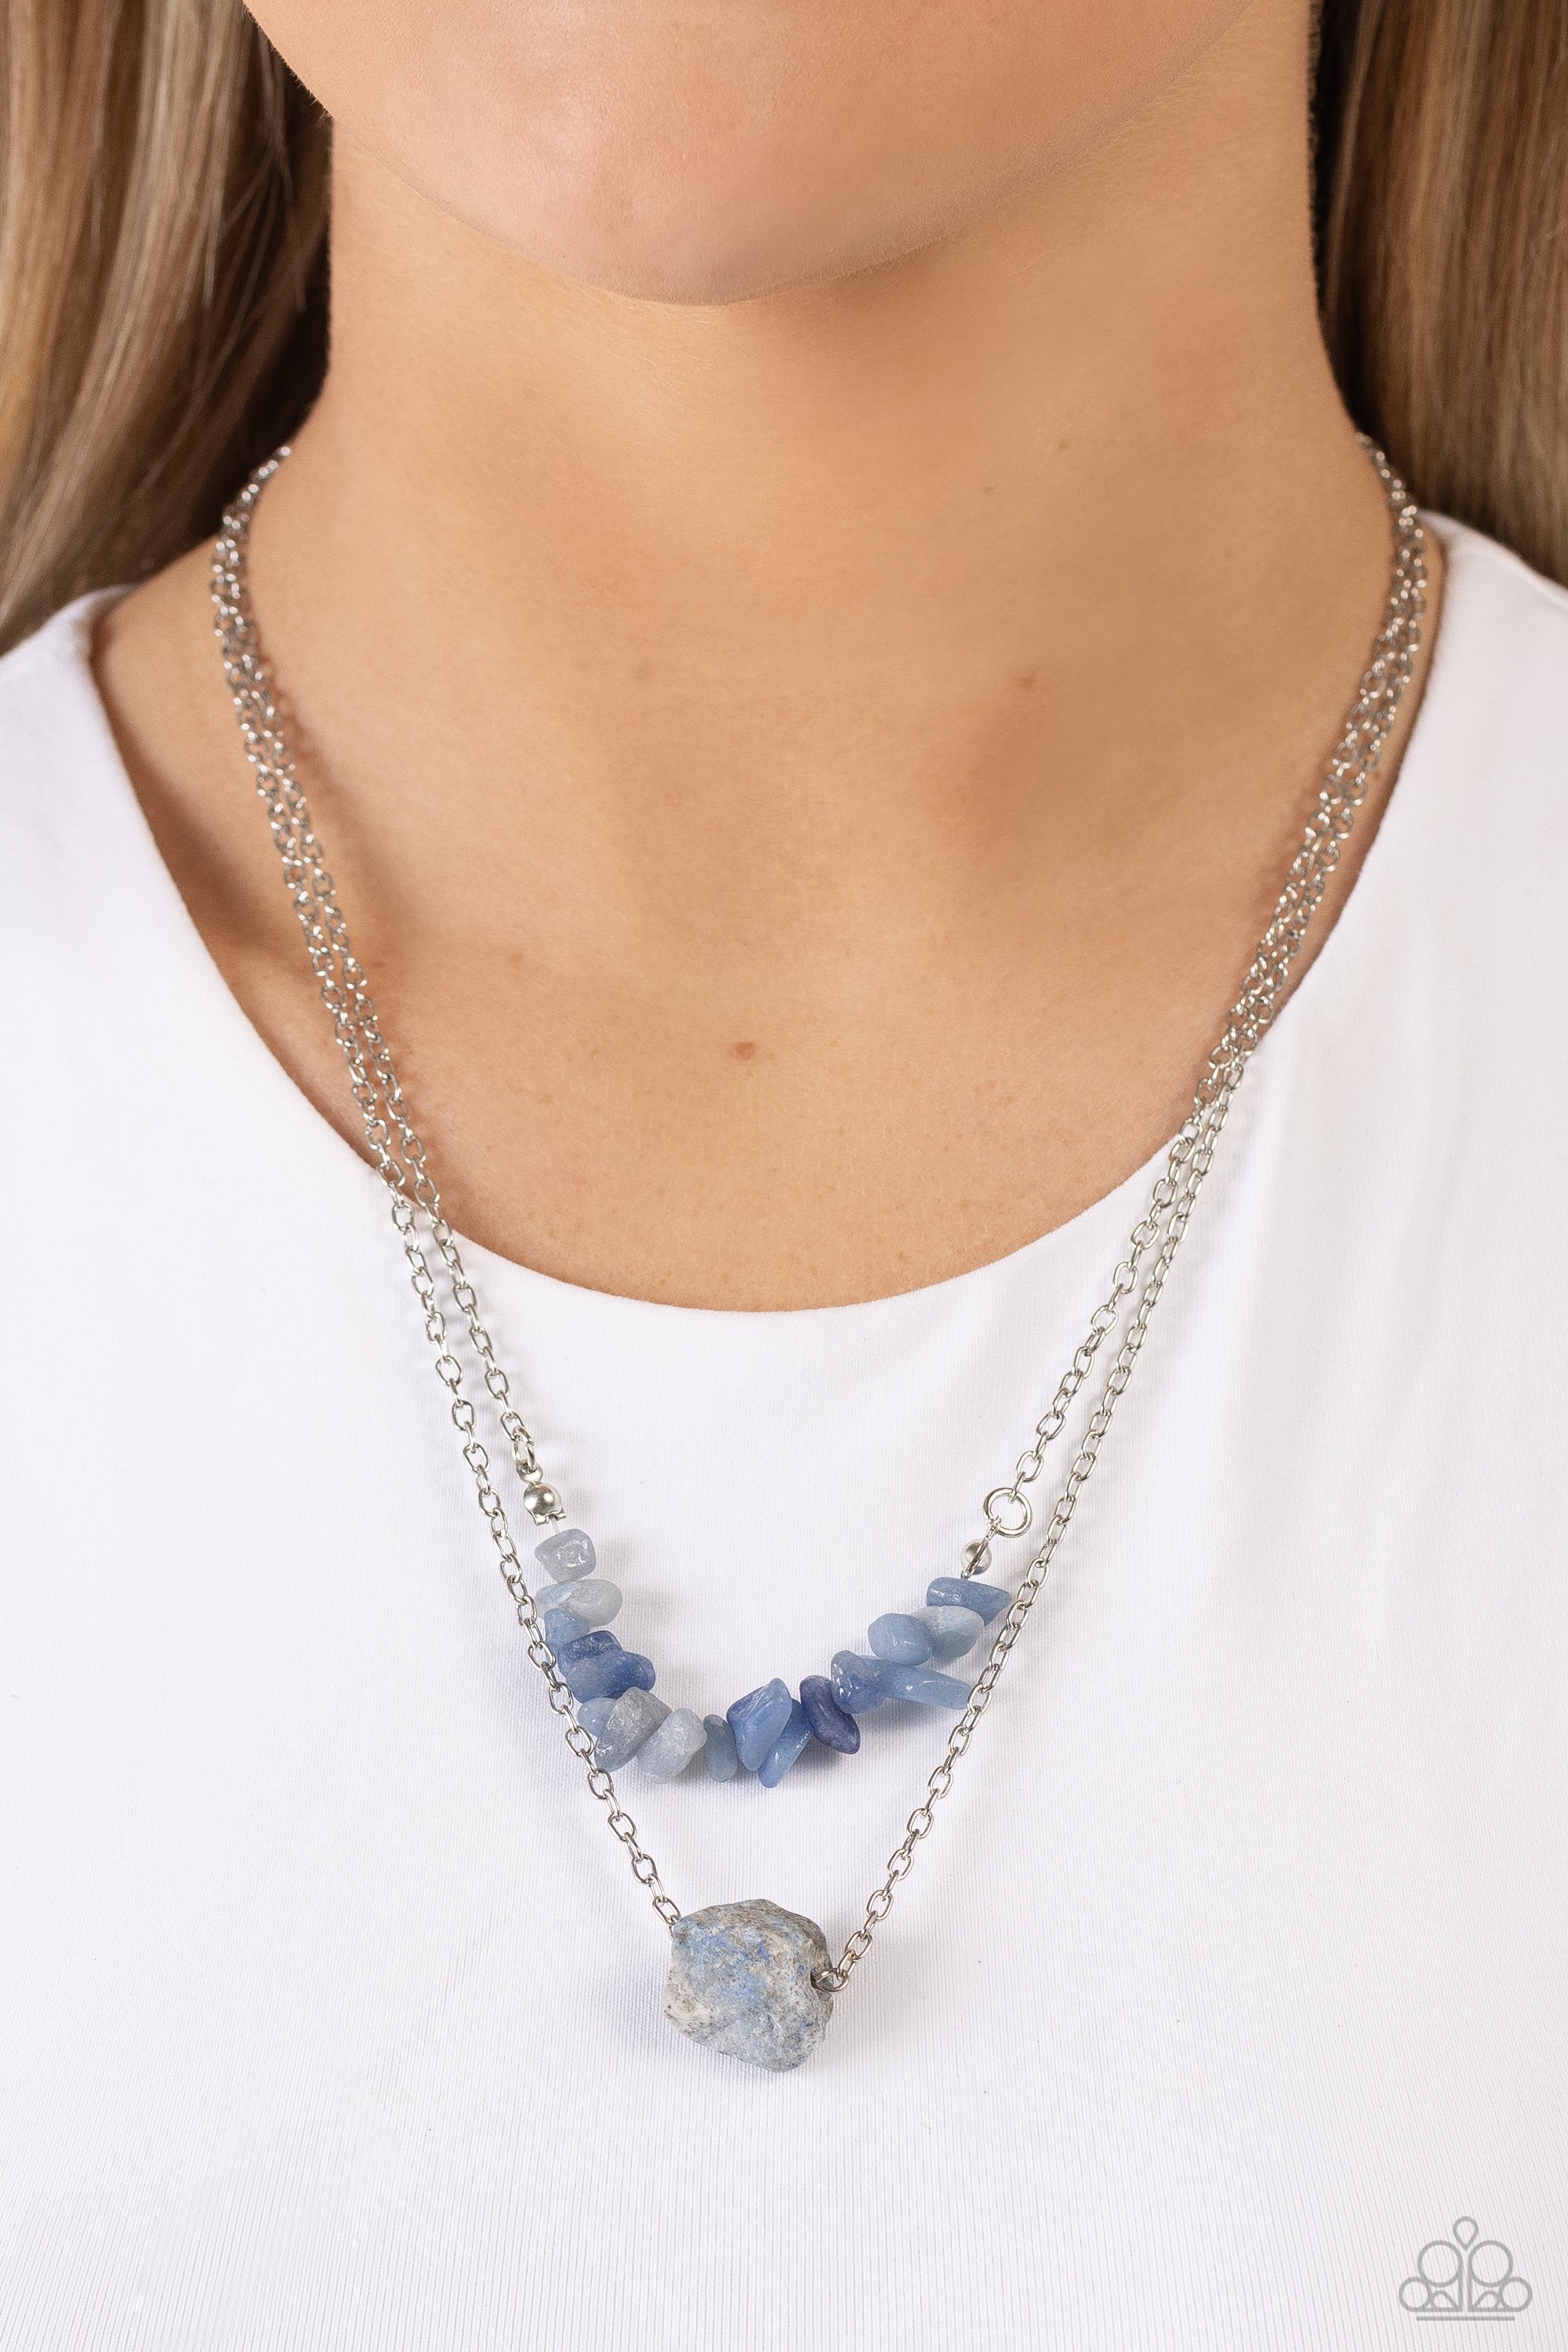 Paparazzi Accessories - Free-Spirited Forager - Blue Necklace